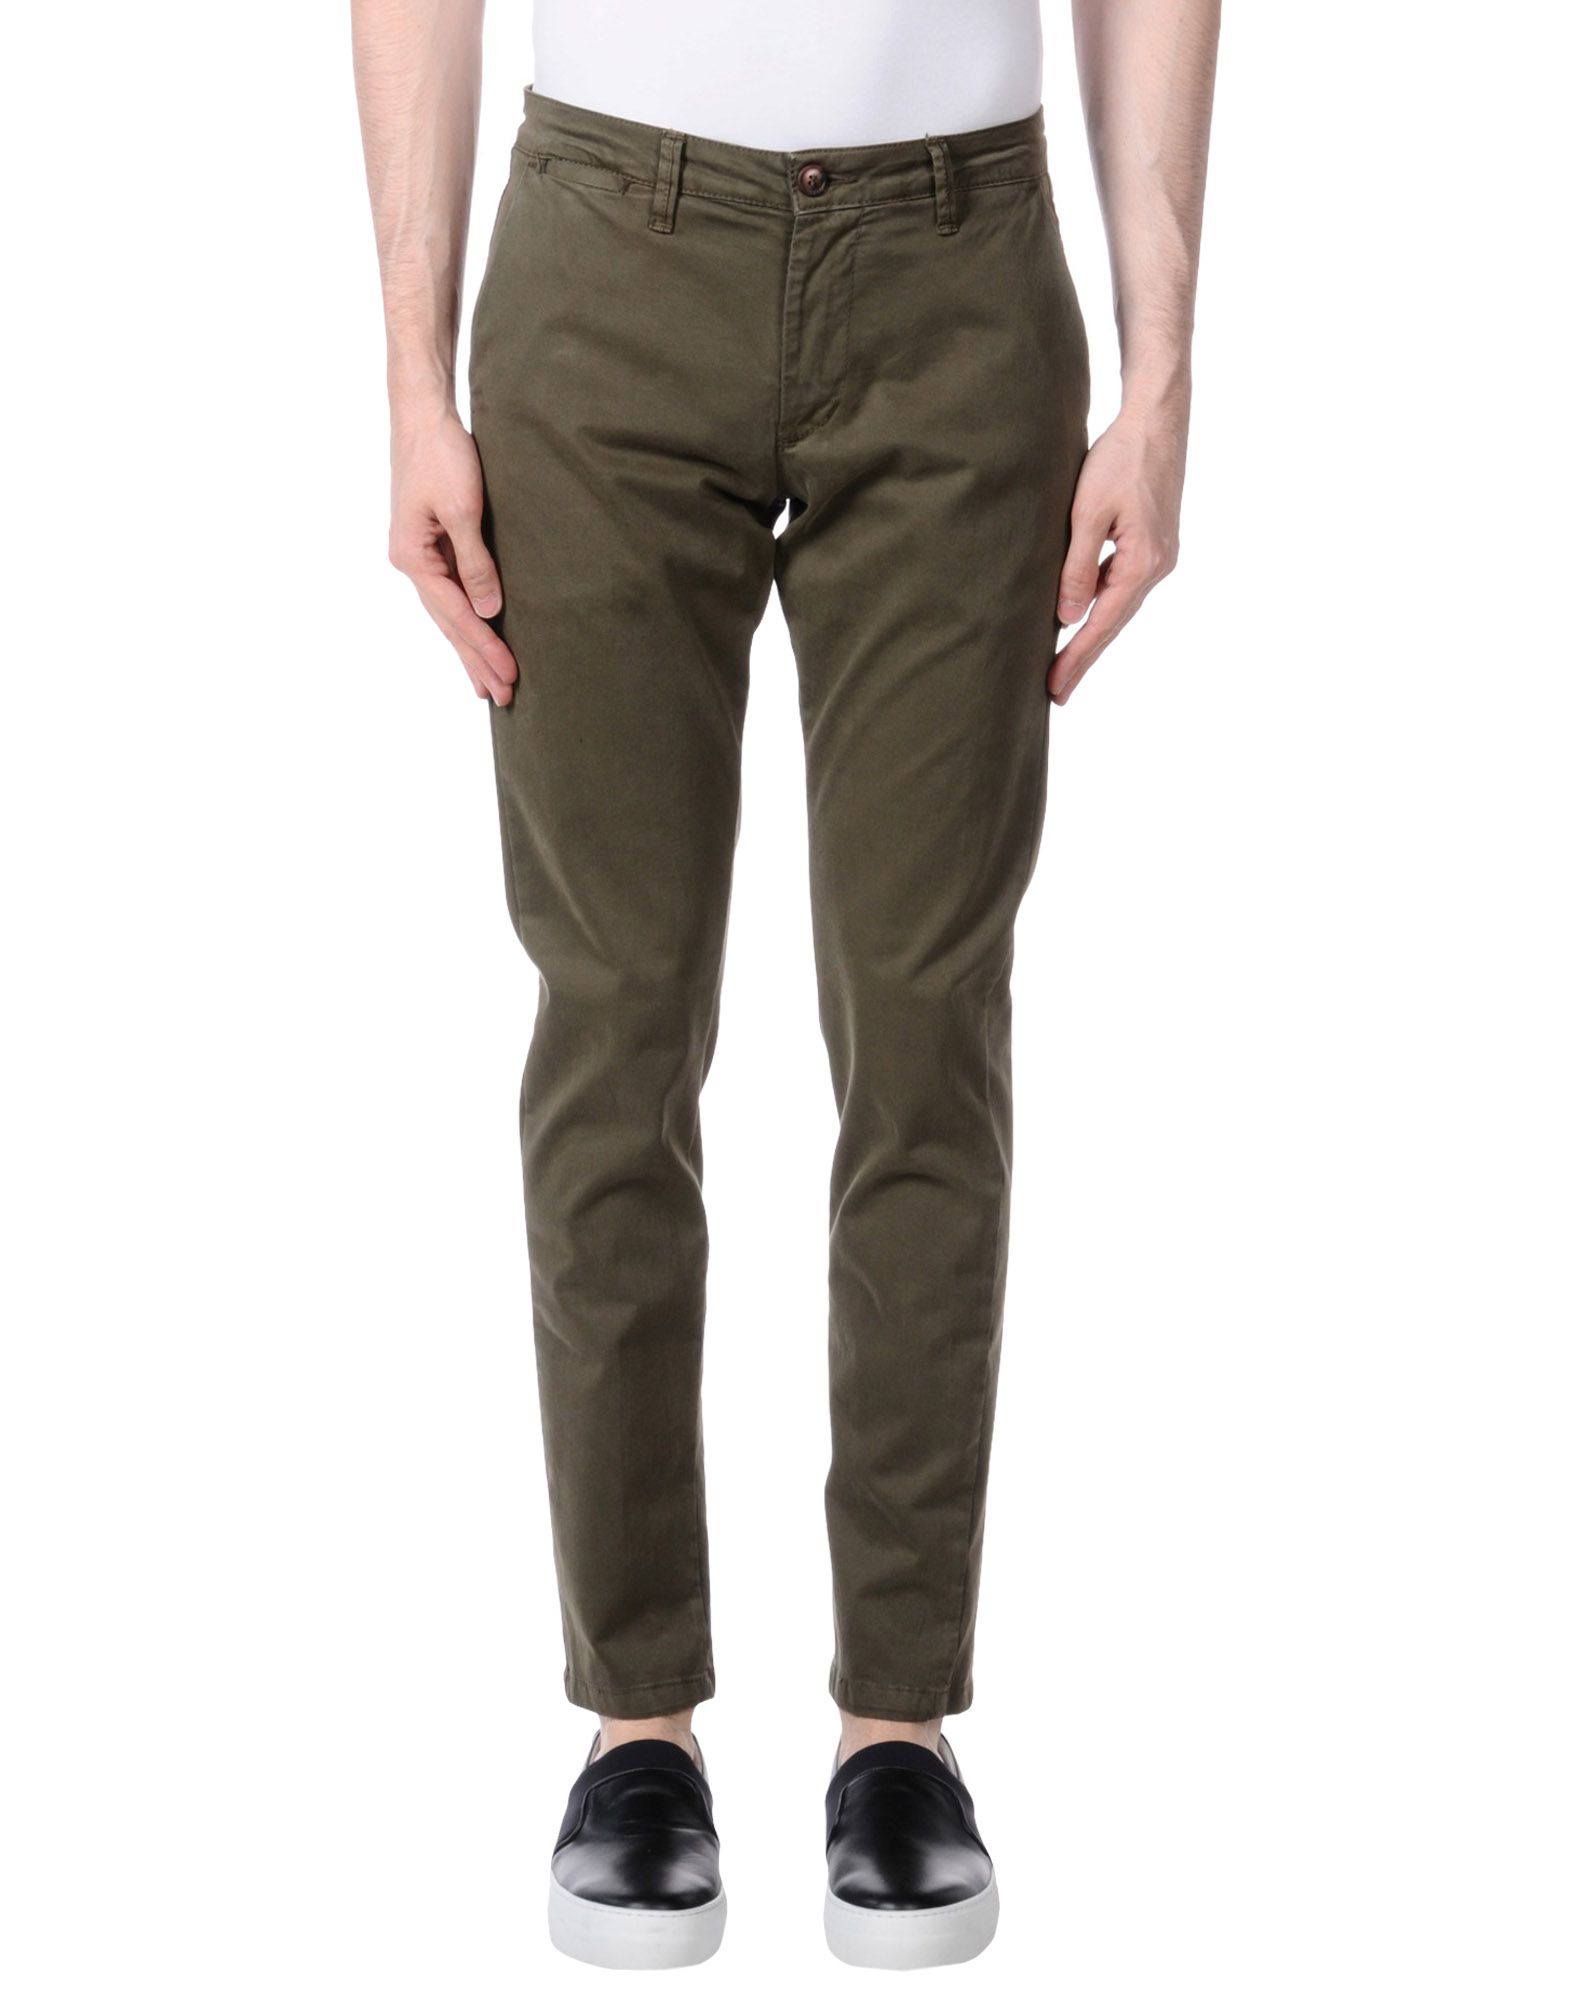 Squad² Pants In Military Green